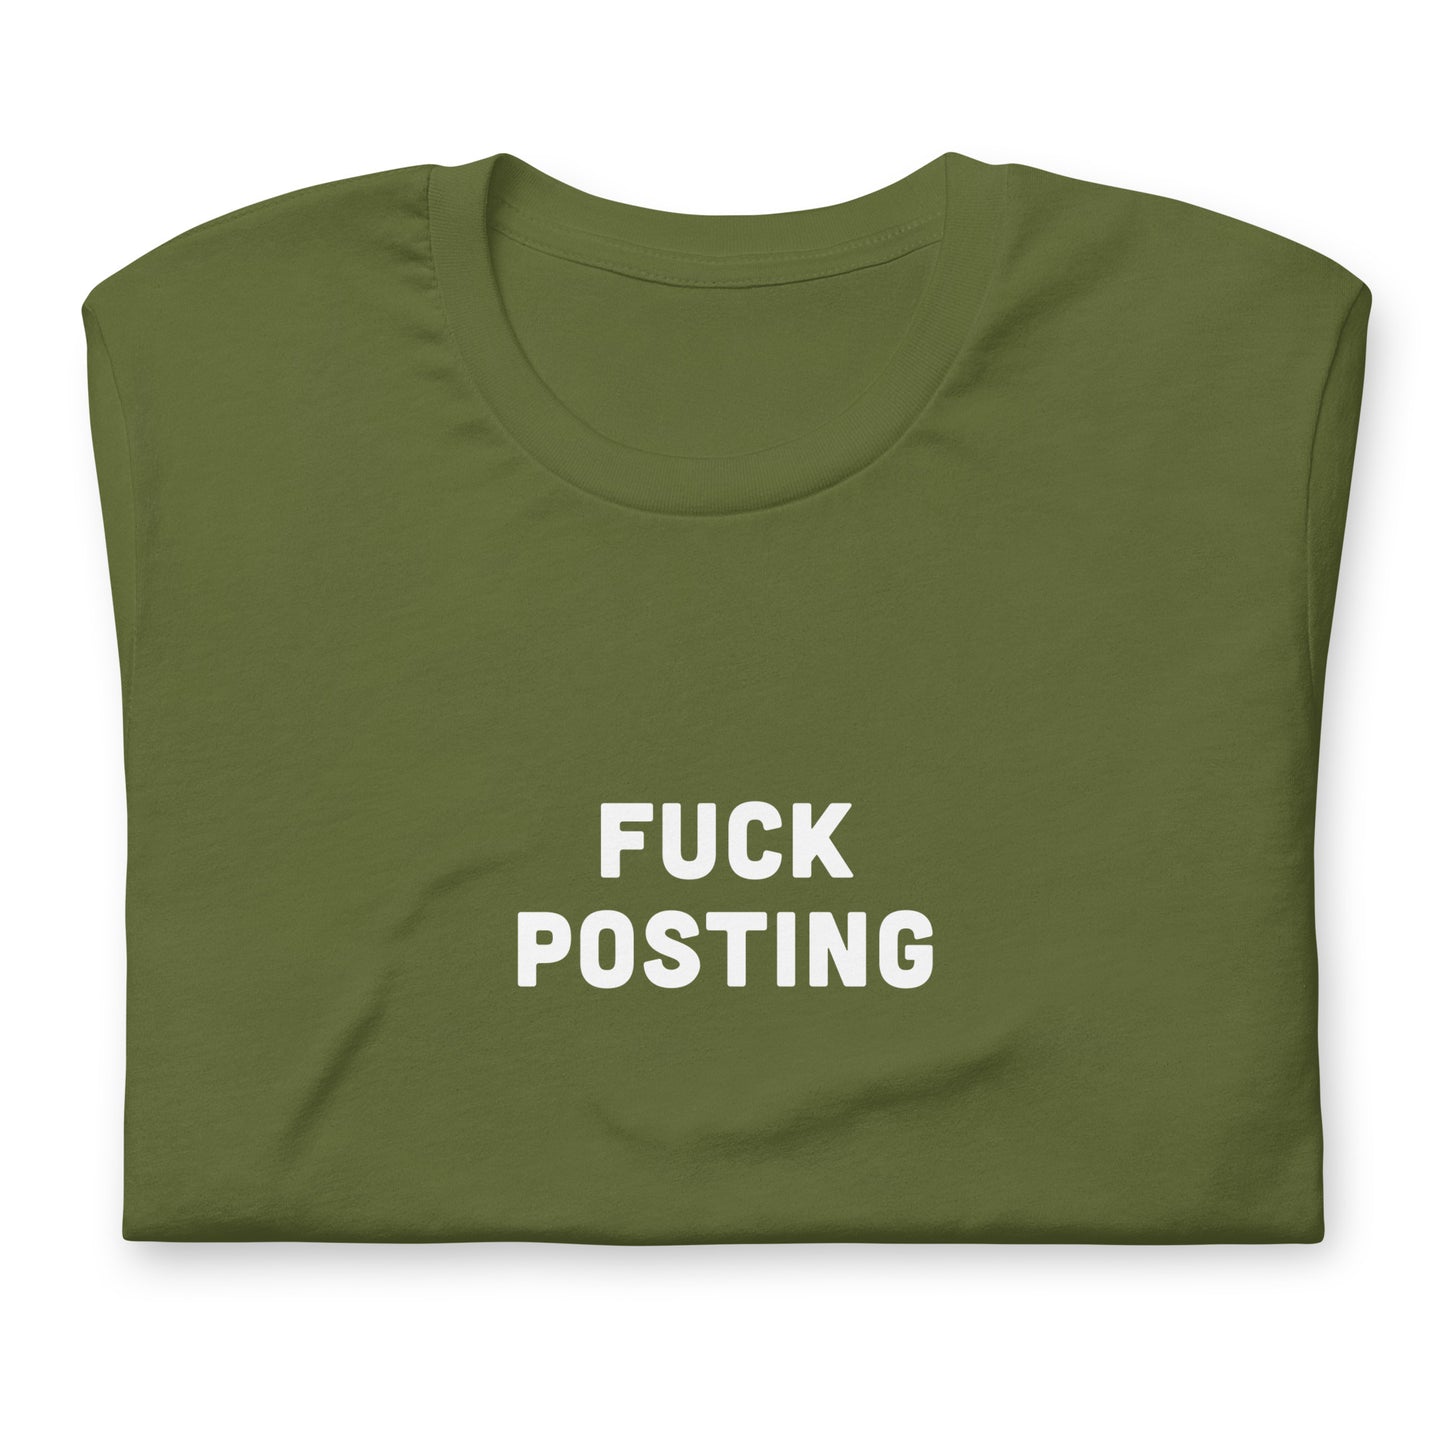 Fuck Posting T-Shirt Size S Color Navy